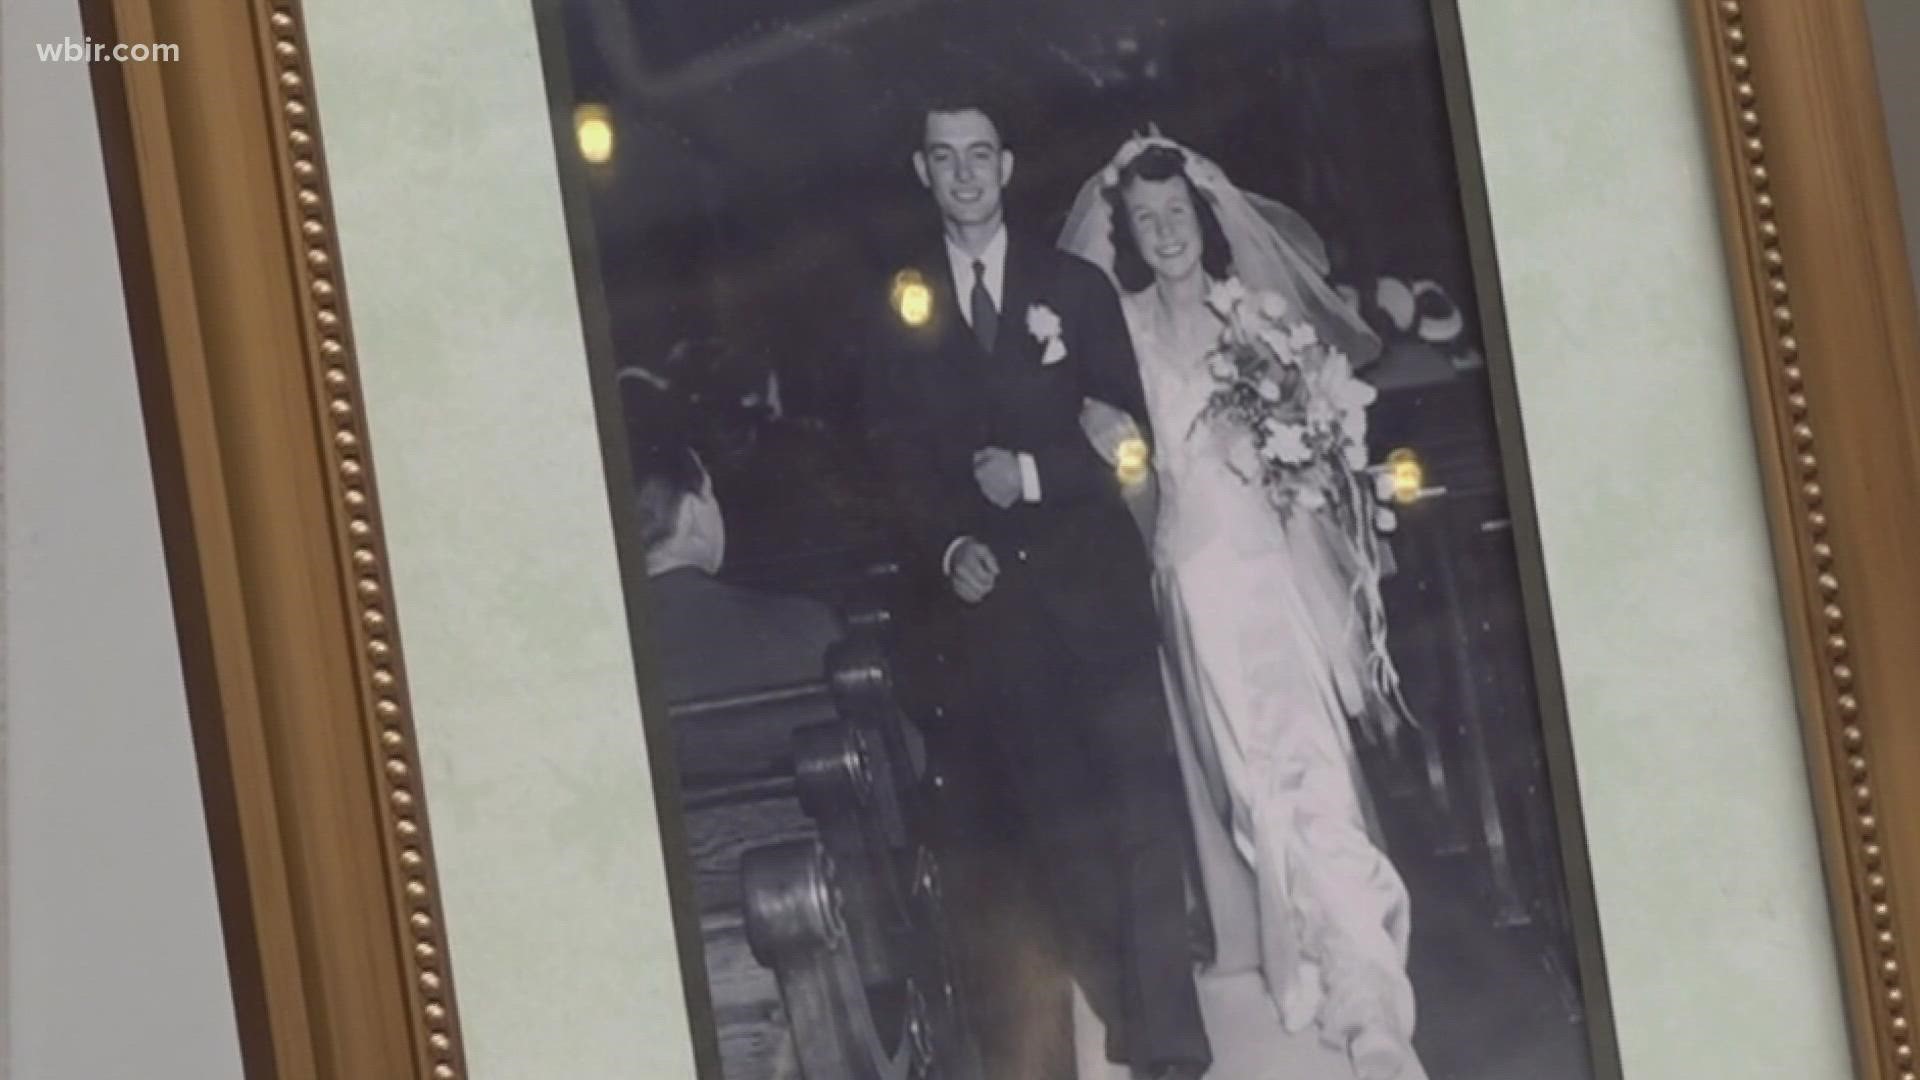 David, 94, and Zenobia, 93, got married after they graduated from Knoxville High school in 1947.